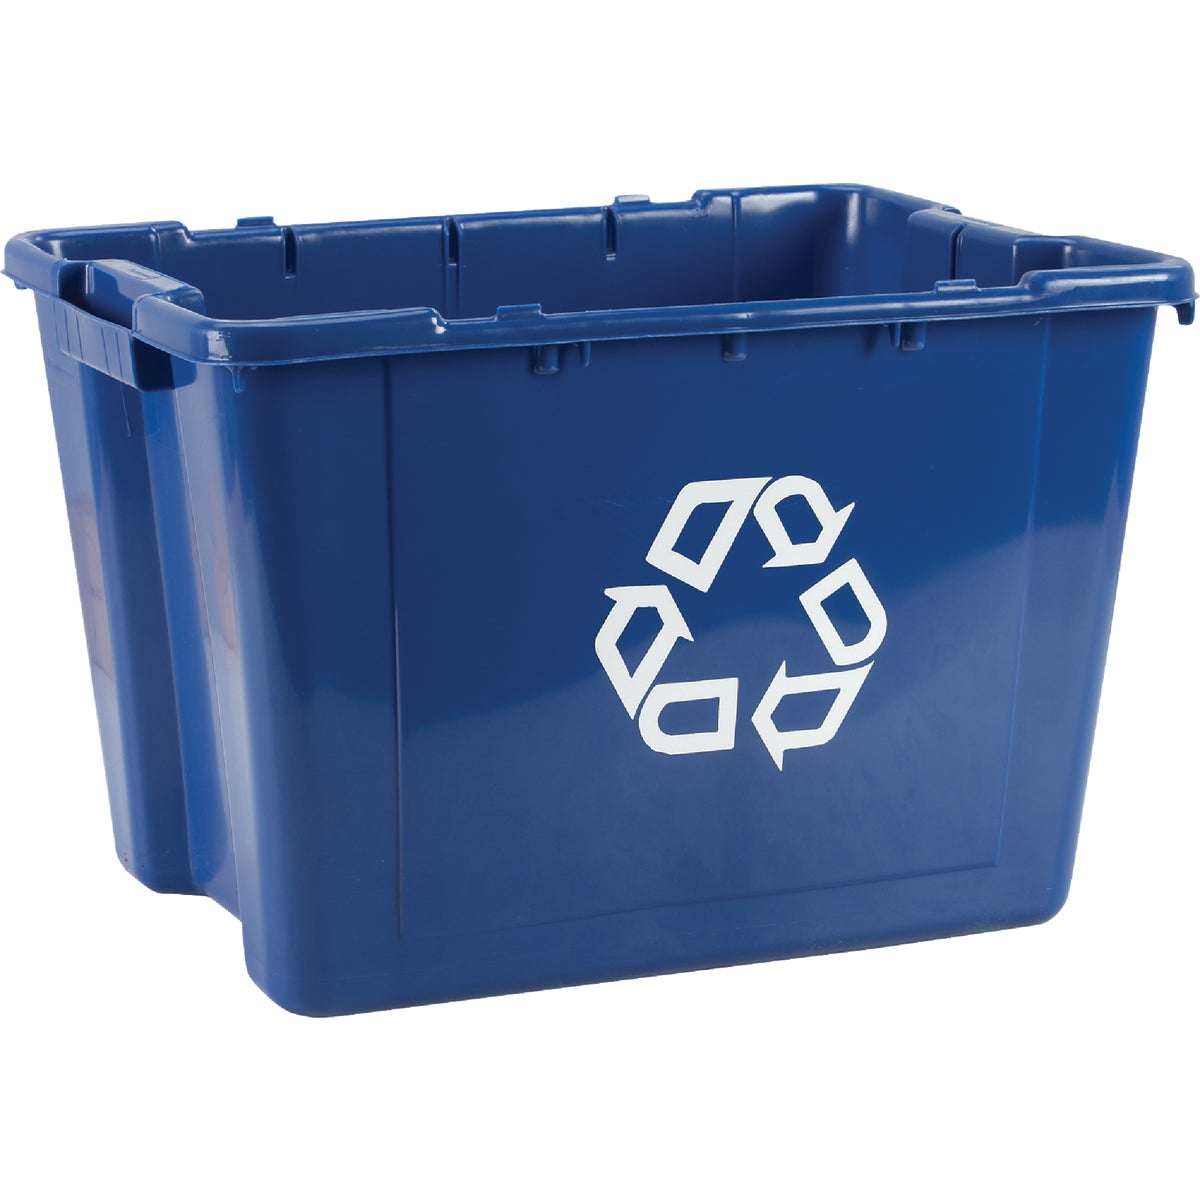 Rubbermaid Commercial 14 Gal. Blue Recycling Box